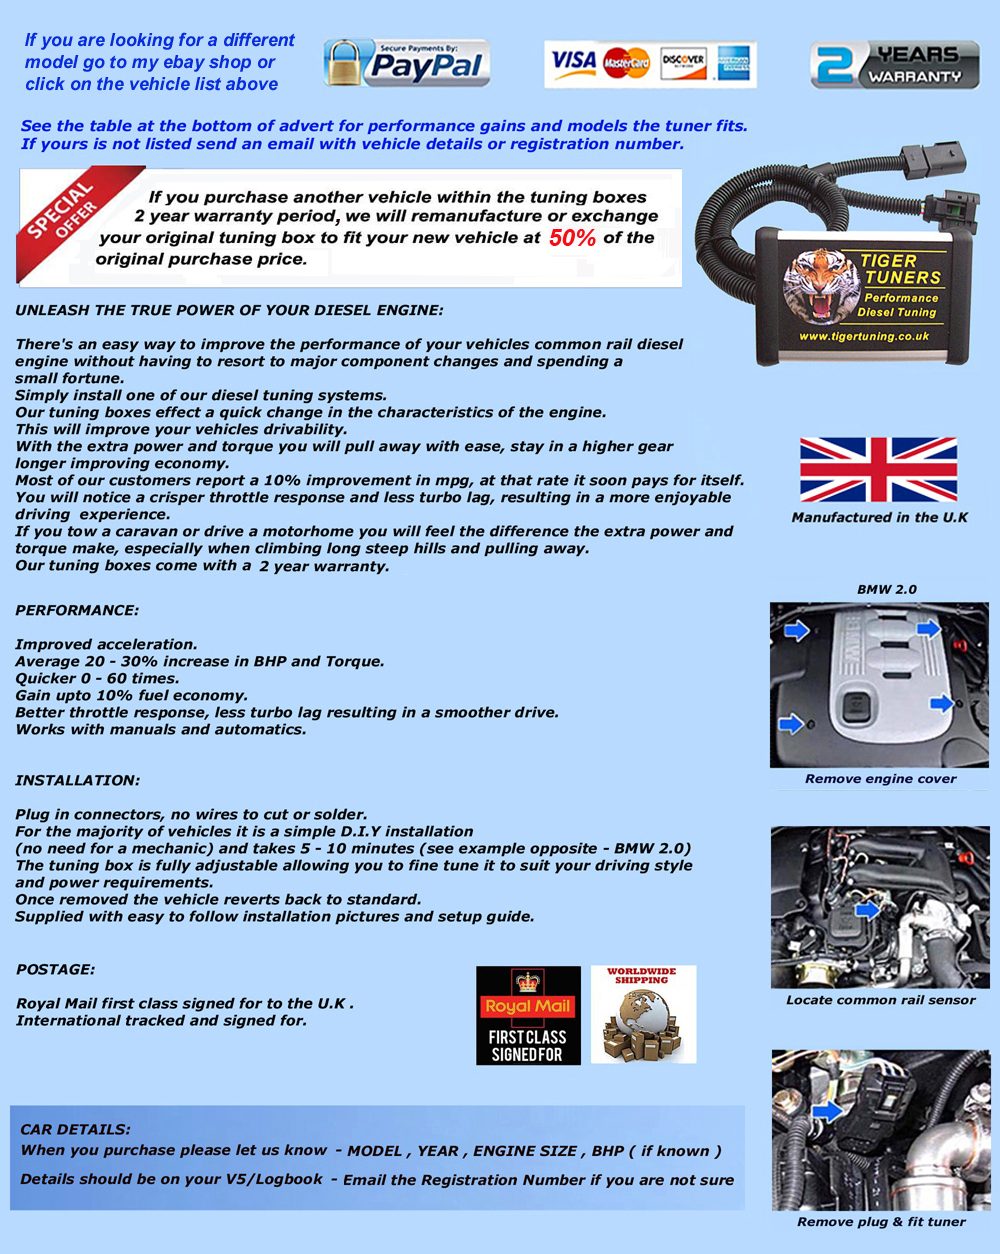 Increase your vehicles performance and save on fuel
unleash the power of your diesel engine
There's an easy way to improve the performance of your vehicles 
common rail  diesel engine without having to resort to major  
component changes and spending  a small fortune. Simply install  
one of our diesel tuning systems